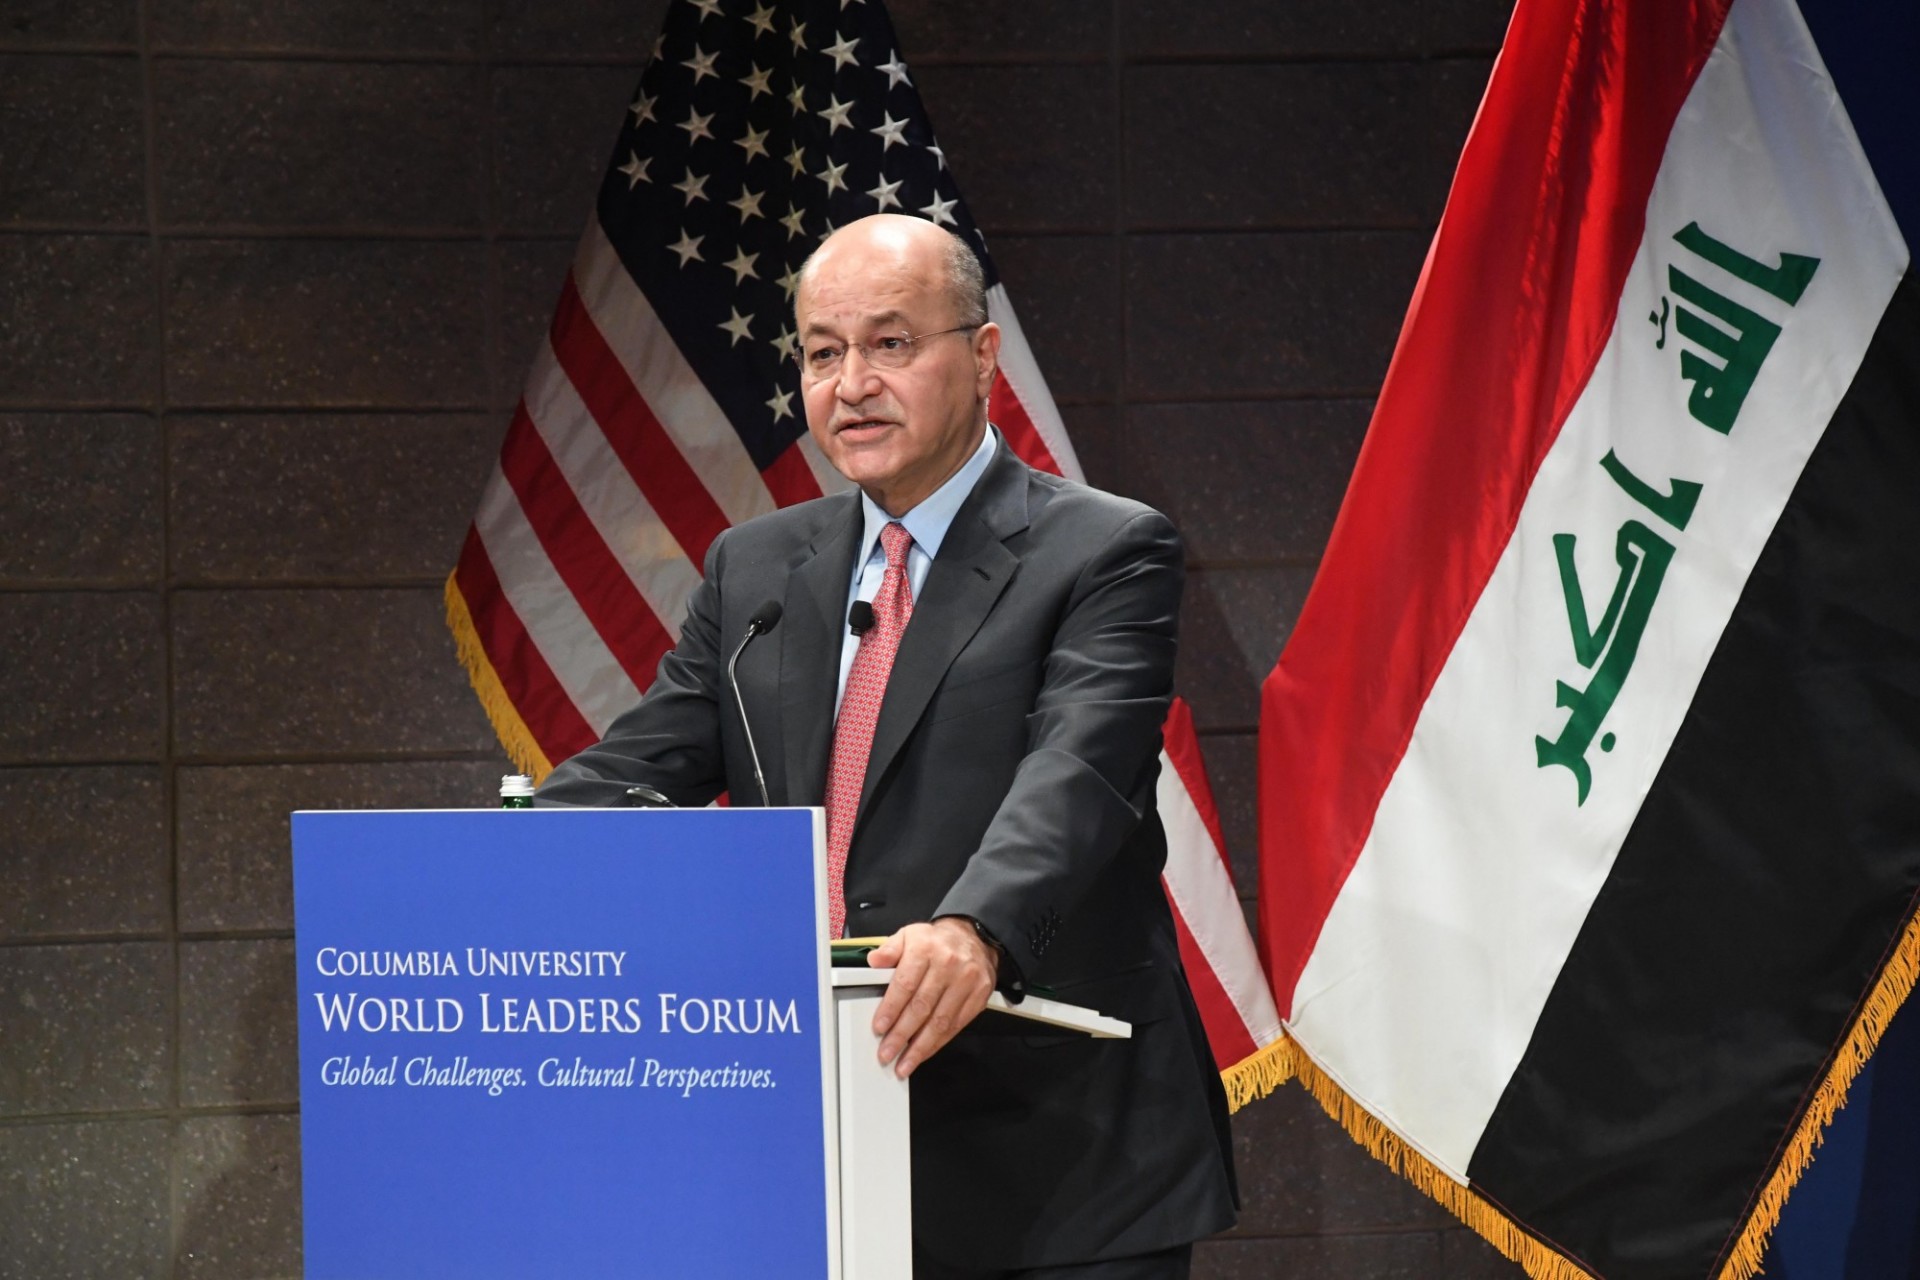 President Barham Salih of Iraq delivers his address to Columbia University students, faculty and staff.